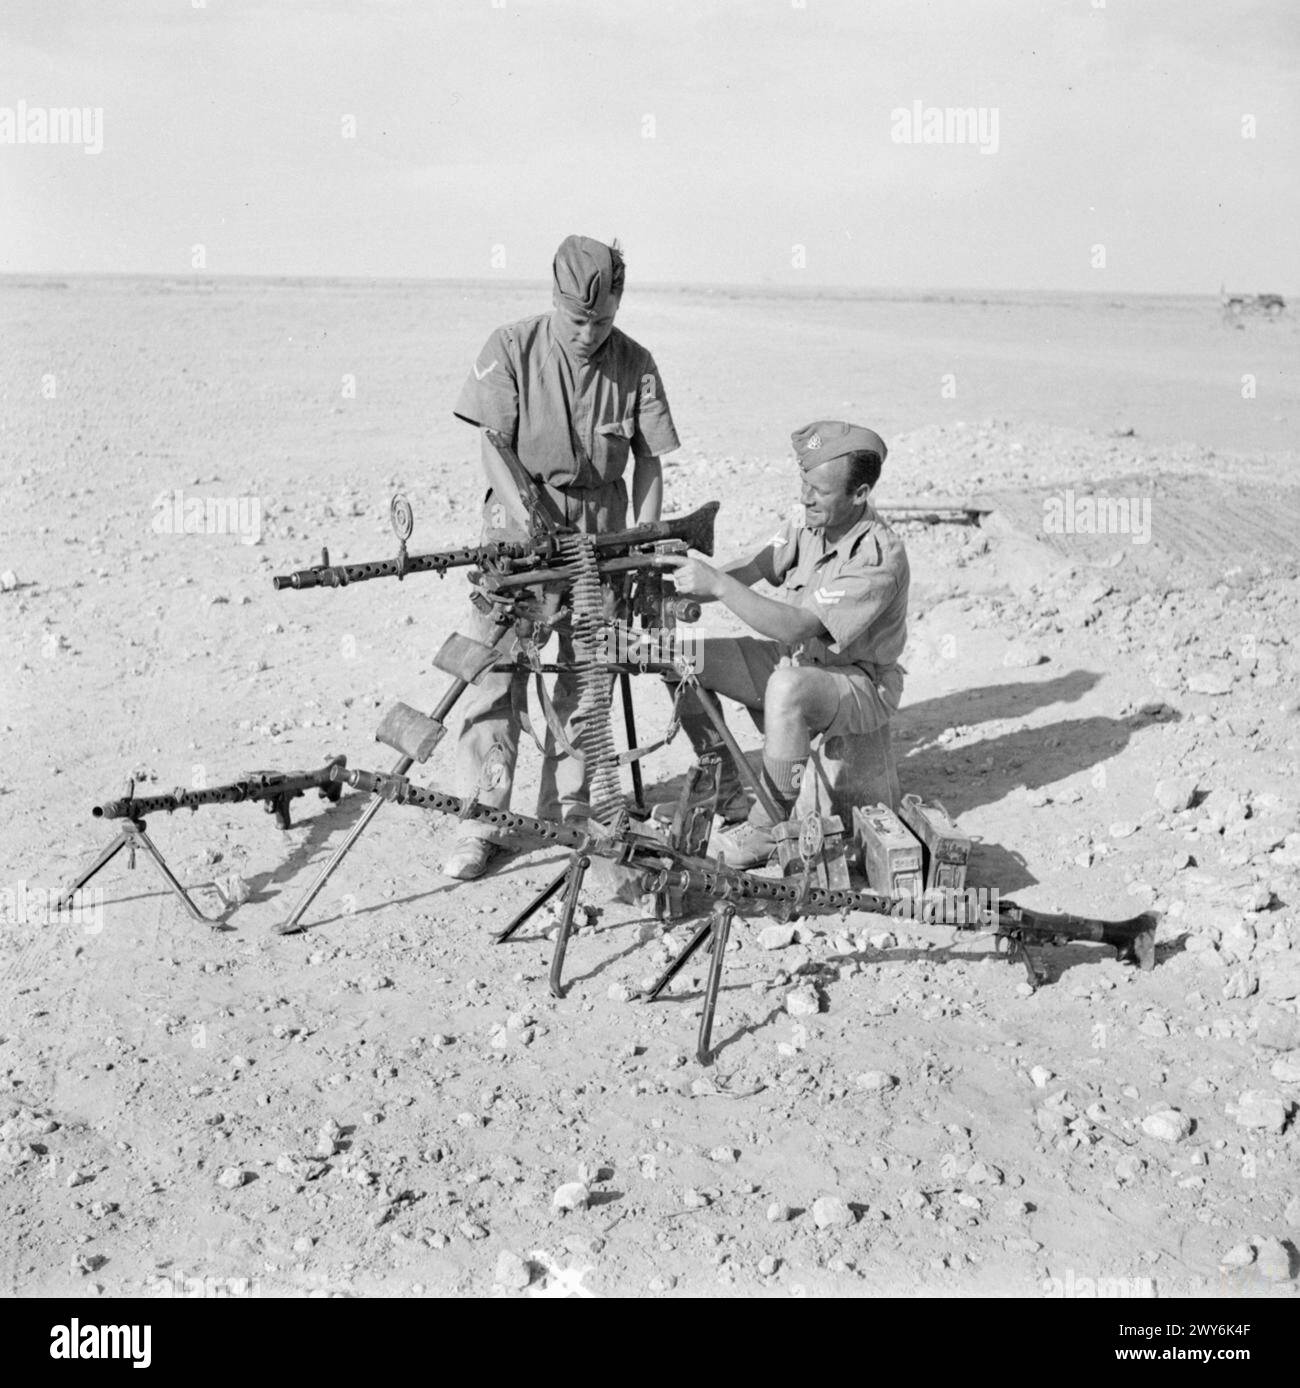 THE BRITISH ARMY IN NORTH AFRICA 1942 - Troops examining captured German MG34 machine guns, 22 April 1942. , Stock Photo